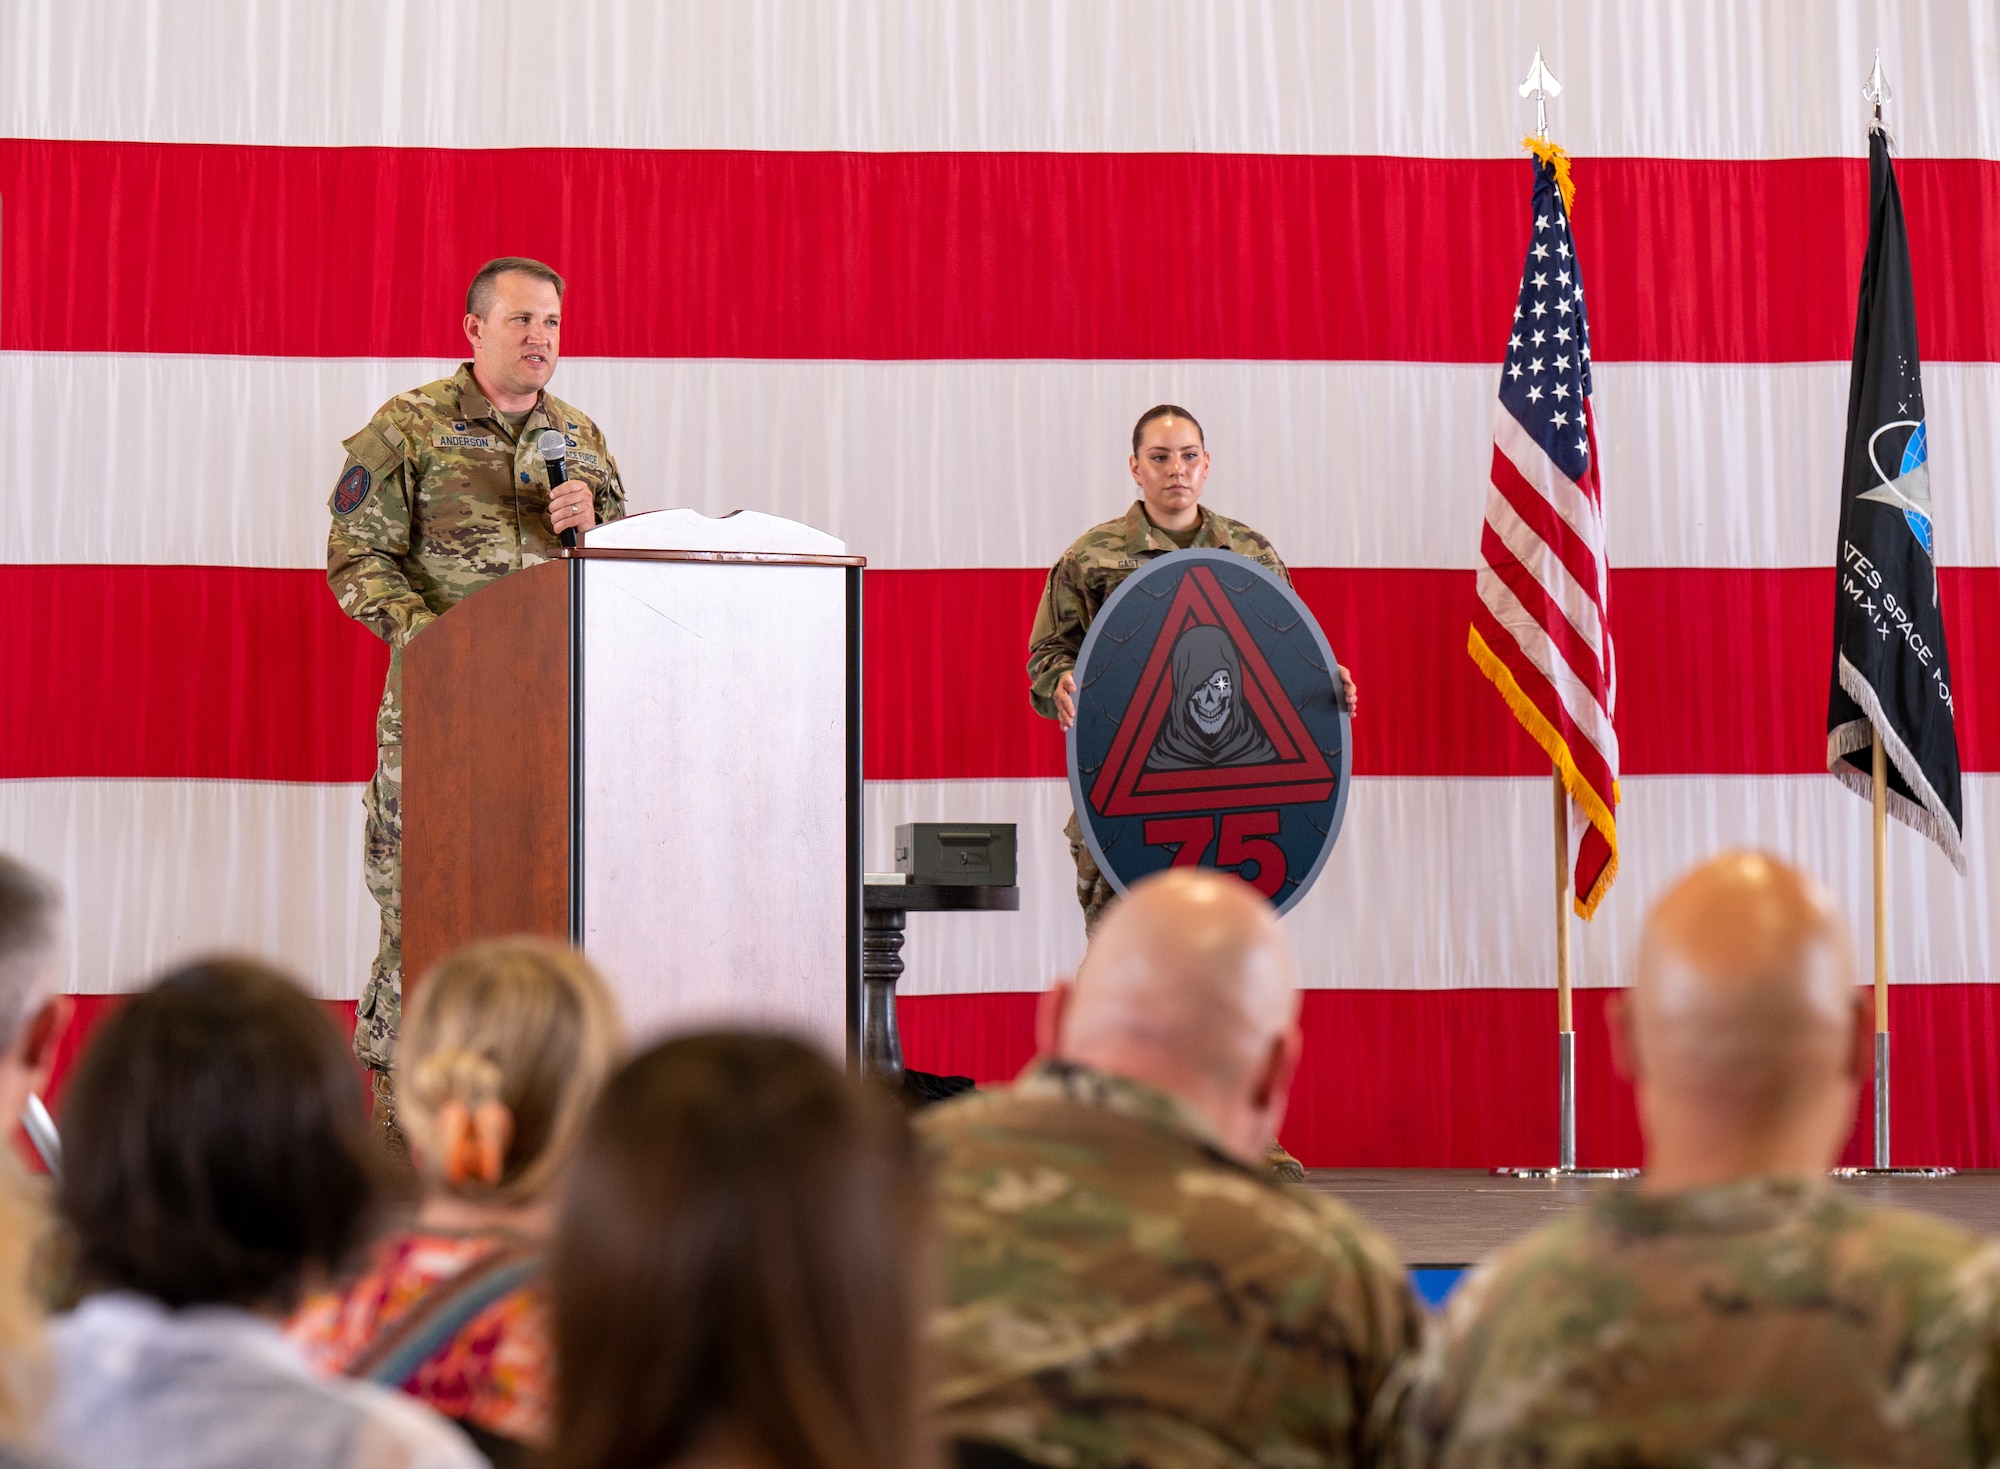 A photo of U.S. Space Force Lt. Col. Travis Anderson, 75th Intelligence, Surveillance and Reconnaissance Squadron commander, on a stage with a large American flag behind him, giving a speech.